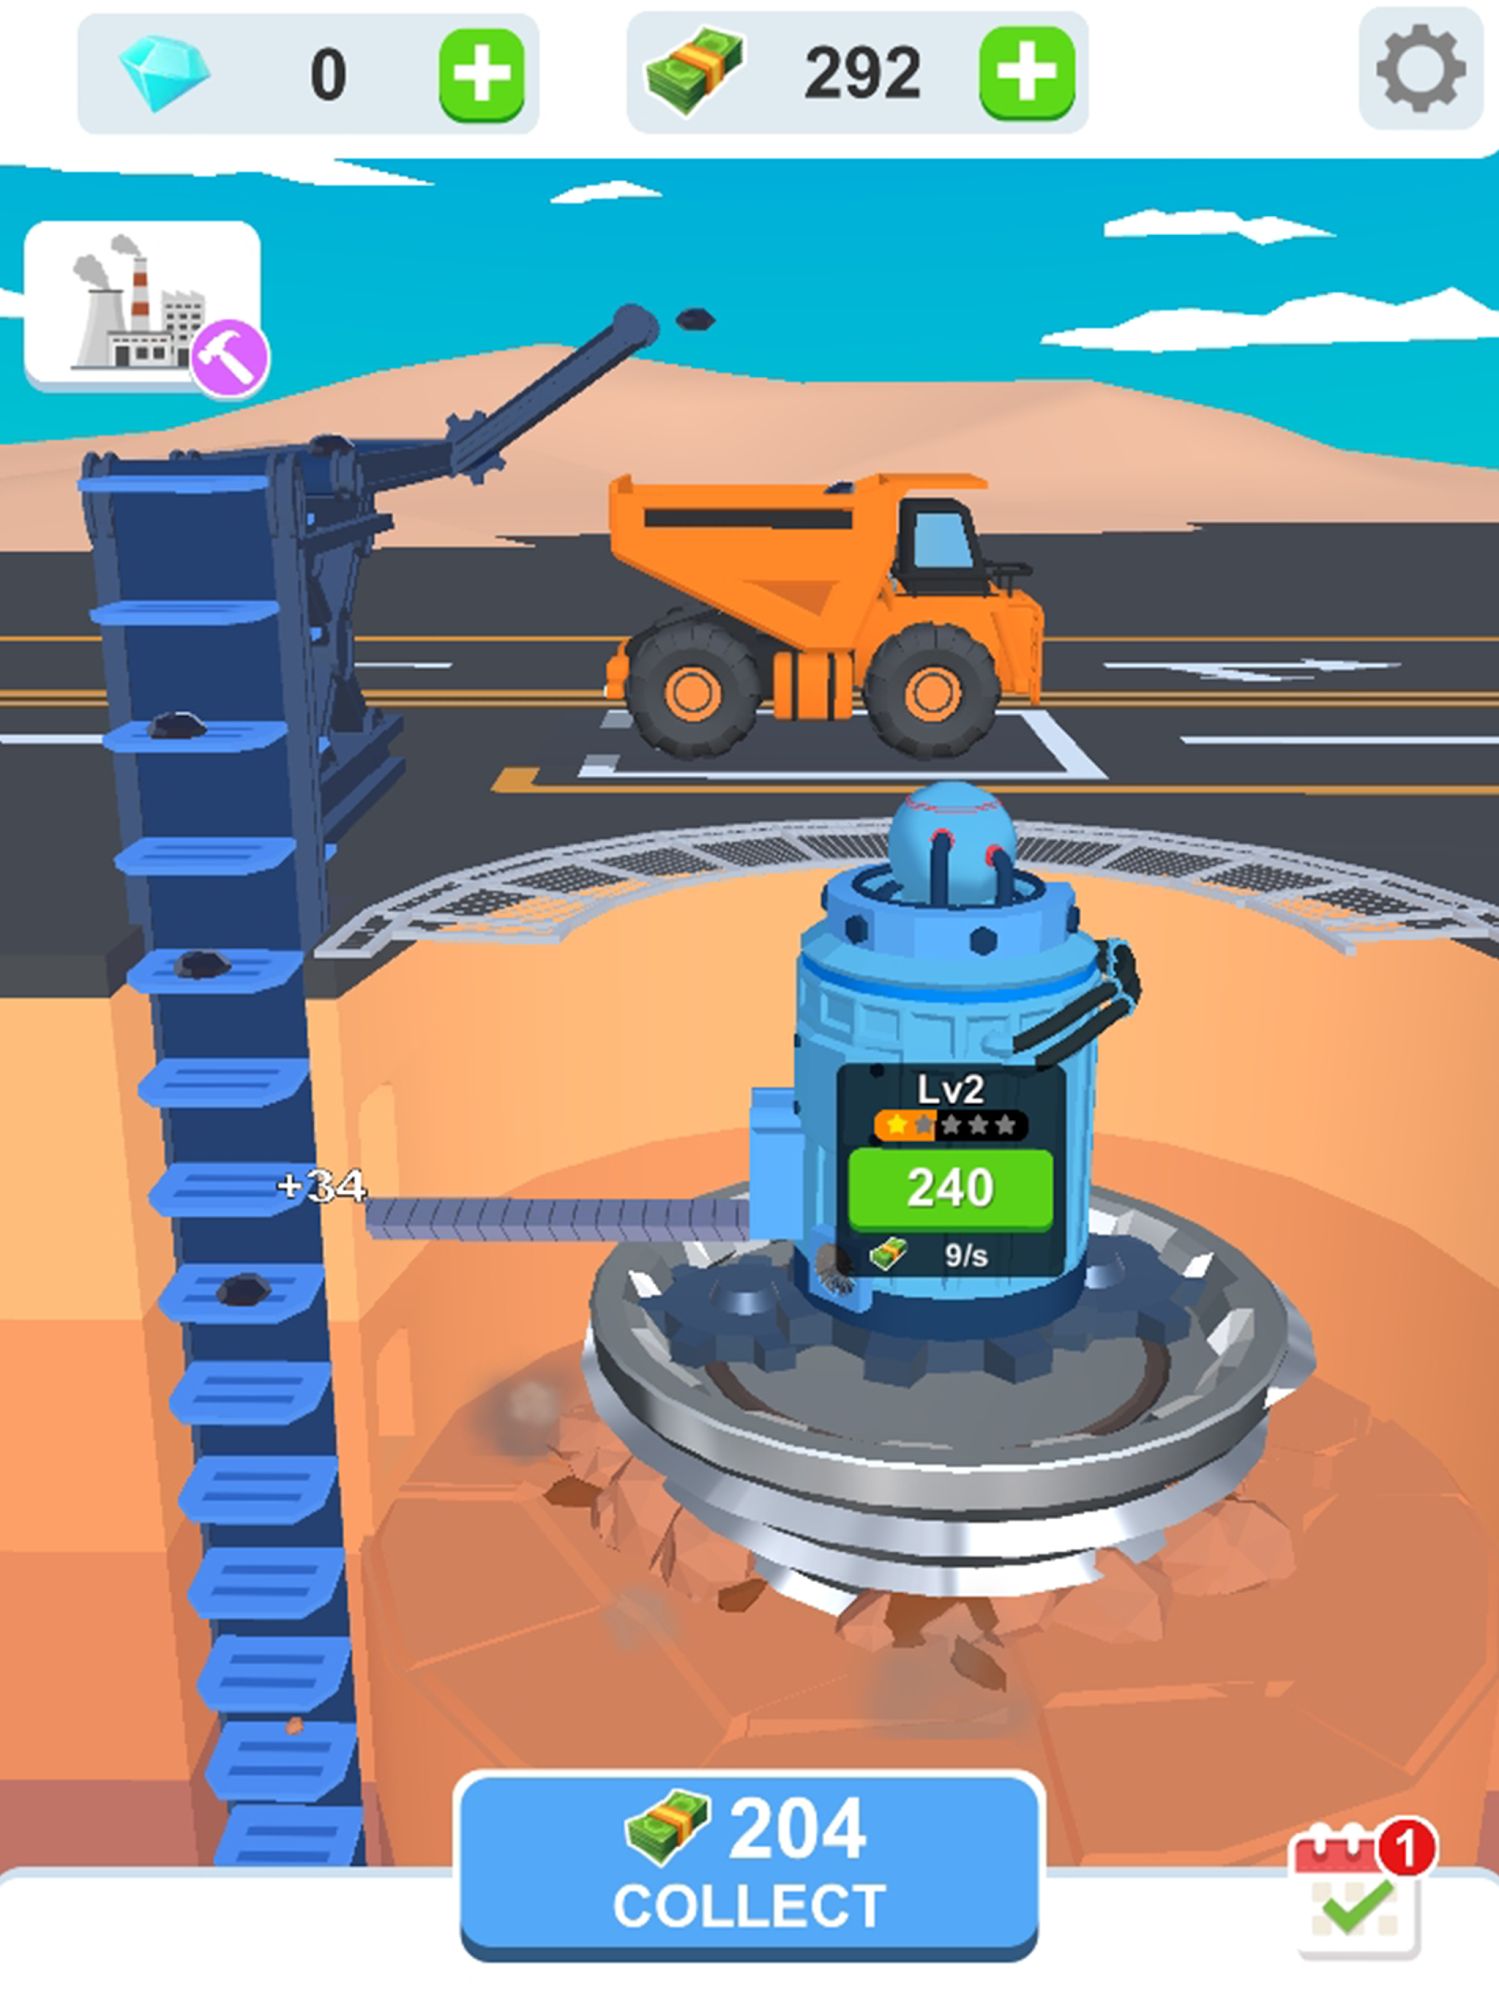 Download Idle Dig Factory Android free game.